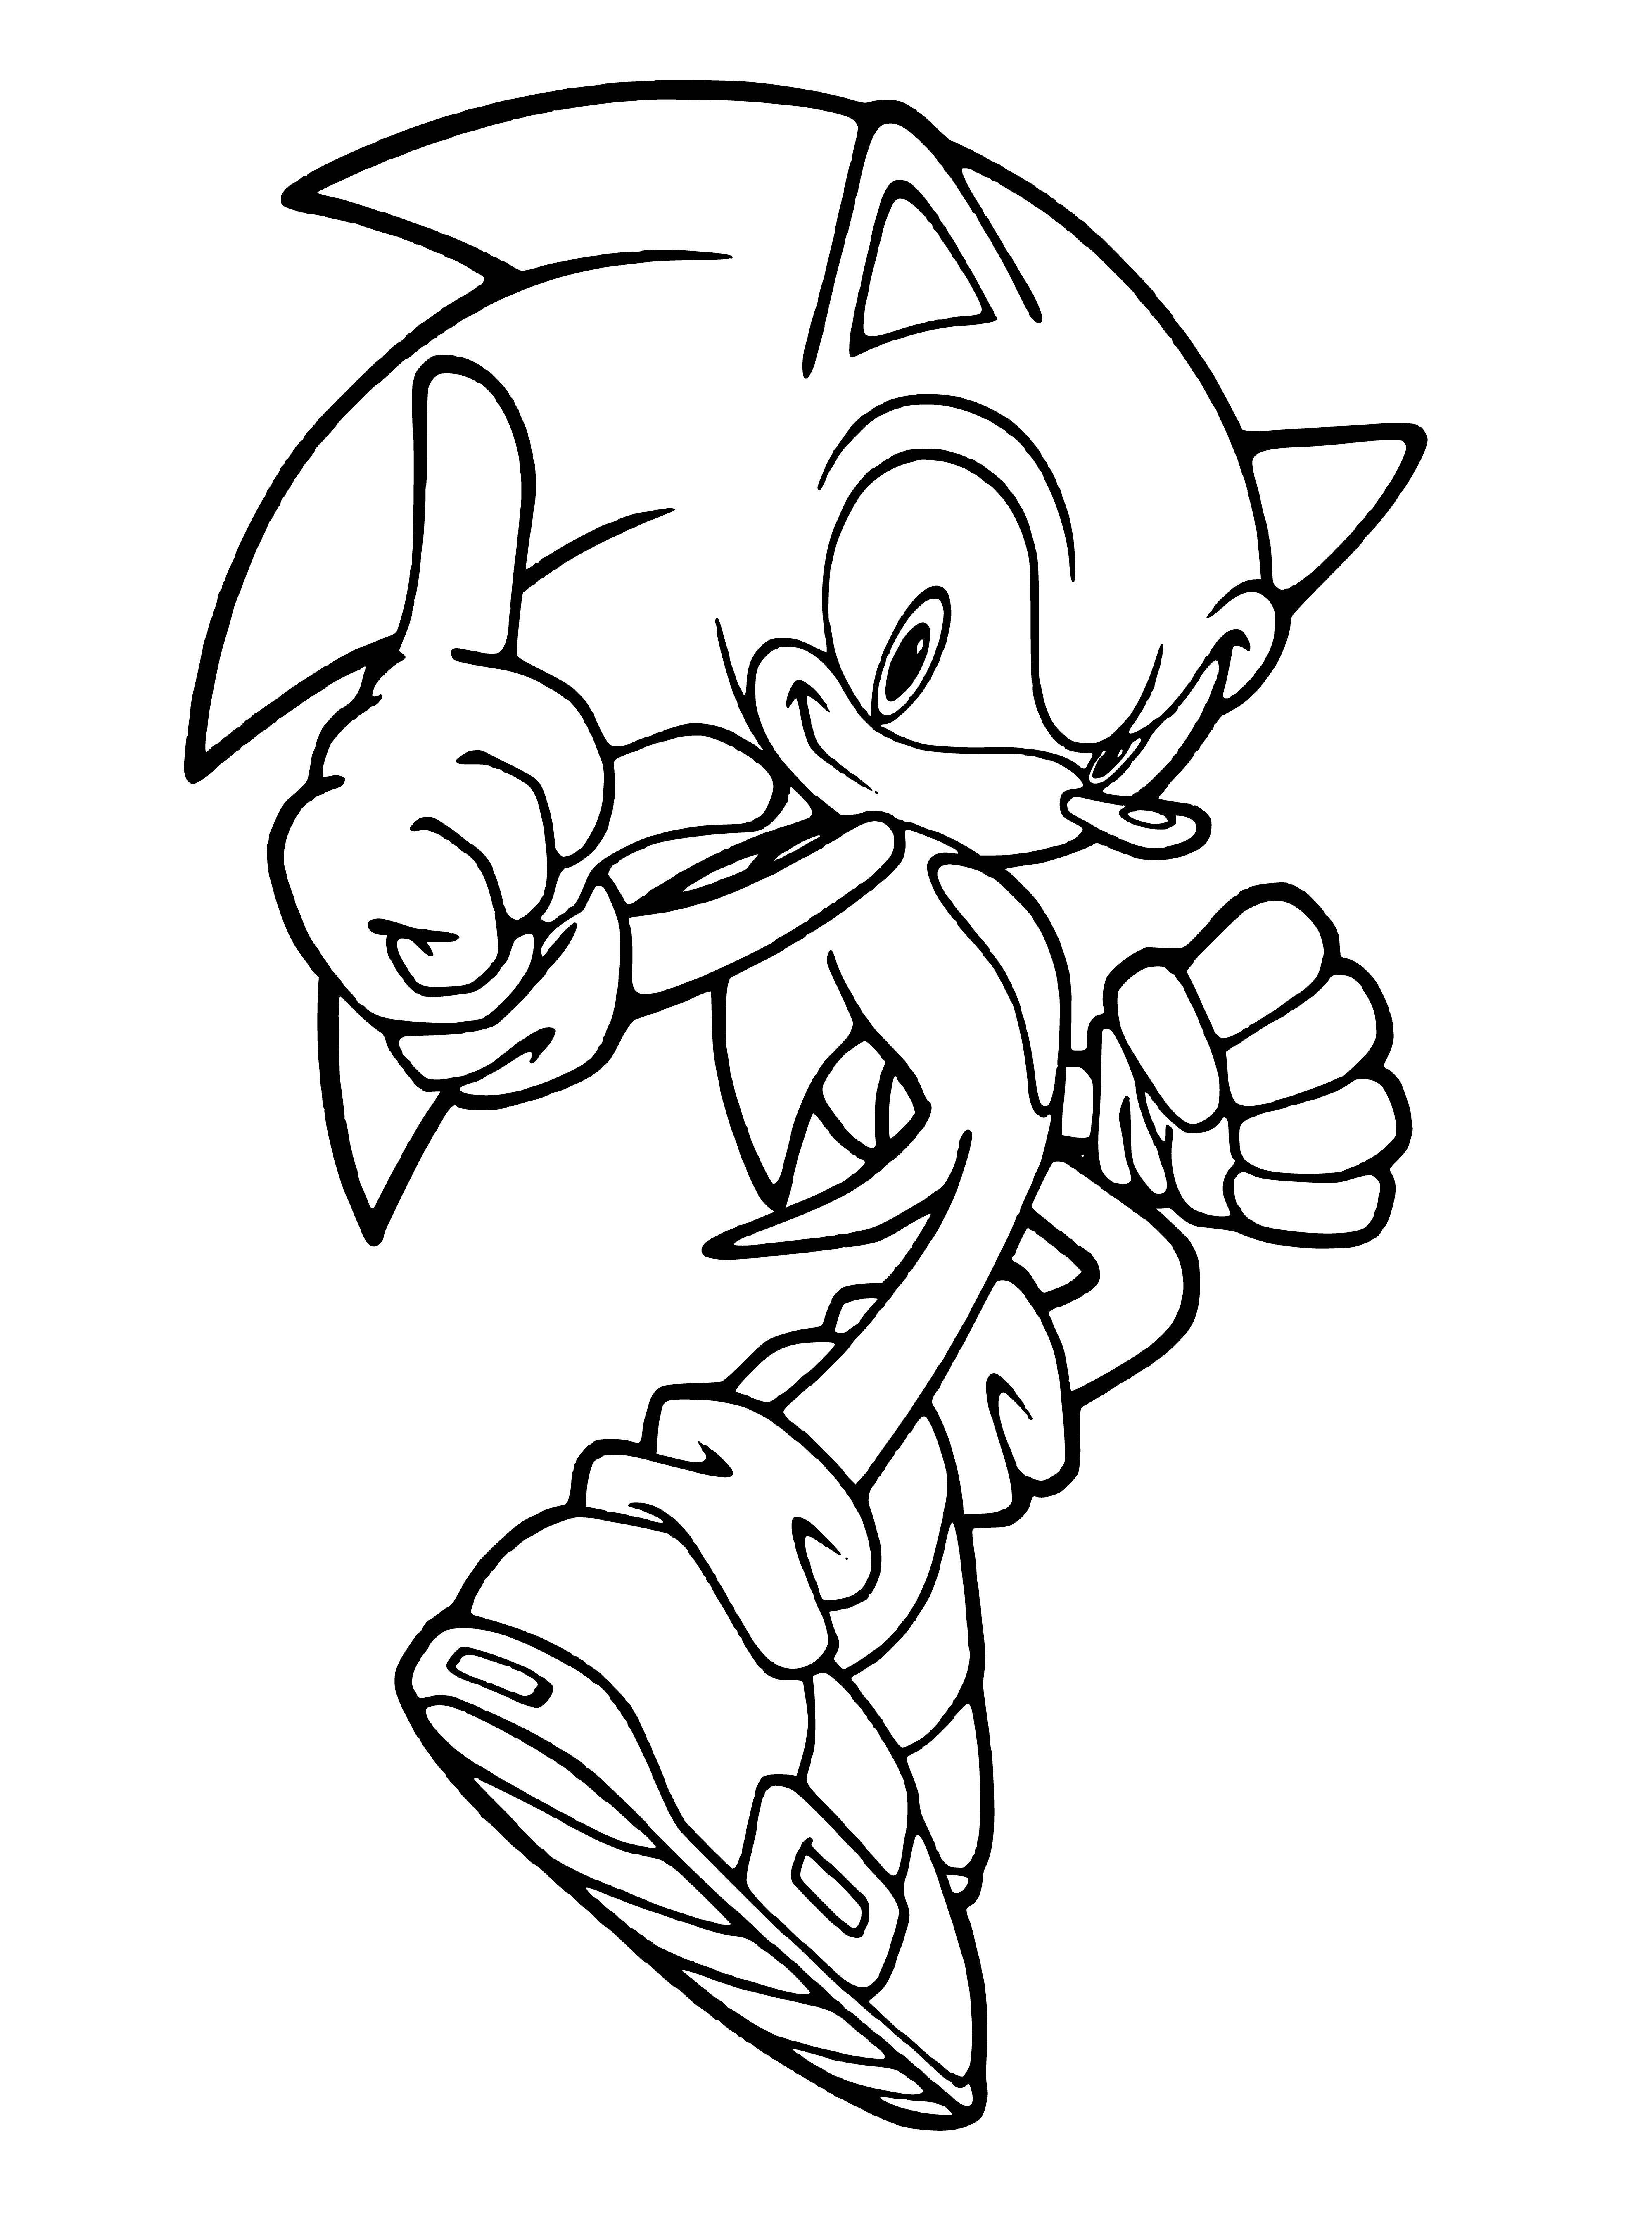 coloring page: Sonic runs through a green hill with a yellow sun in the sky, with red sneakers and white socks. He has a large white head and small black eyes. Outstretched arms and legs add motion.